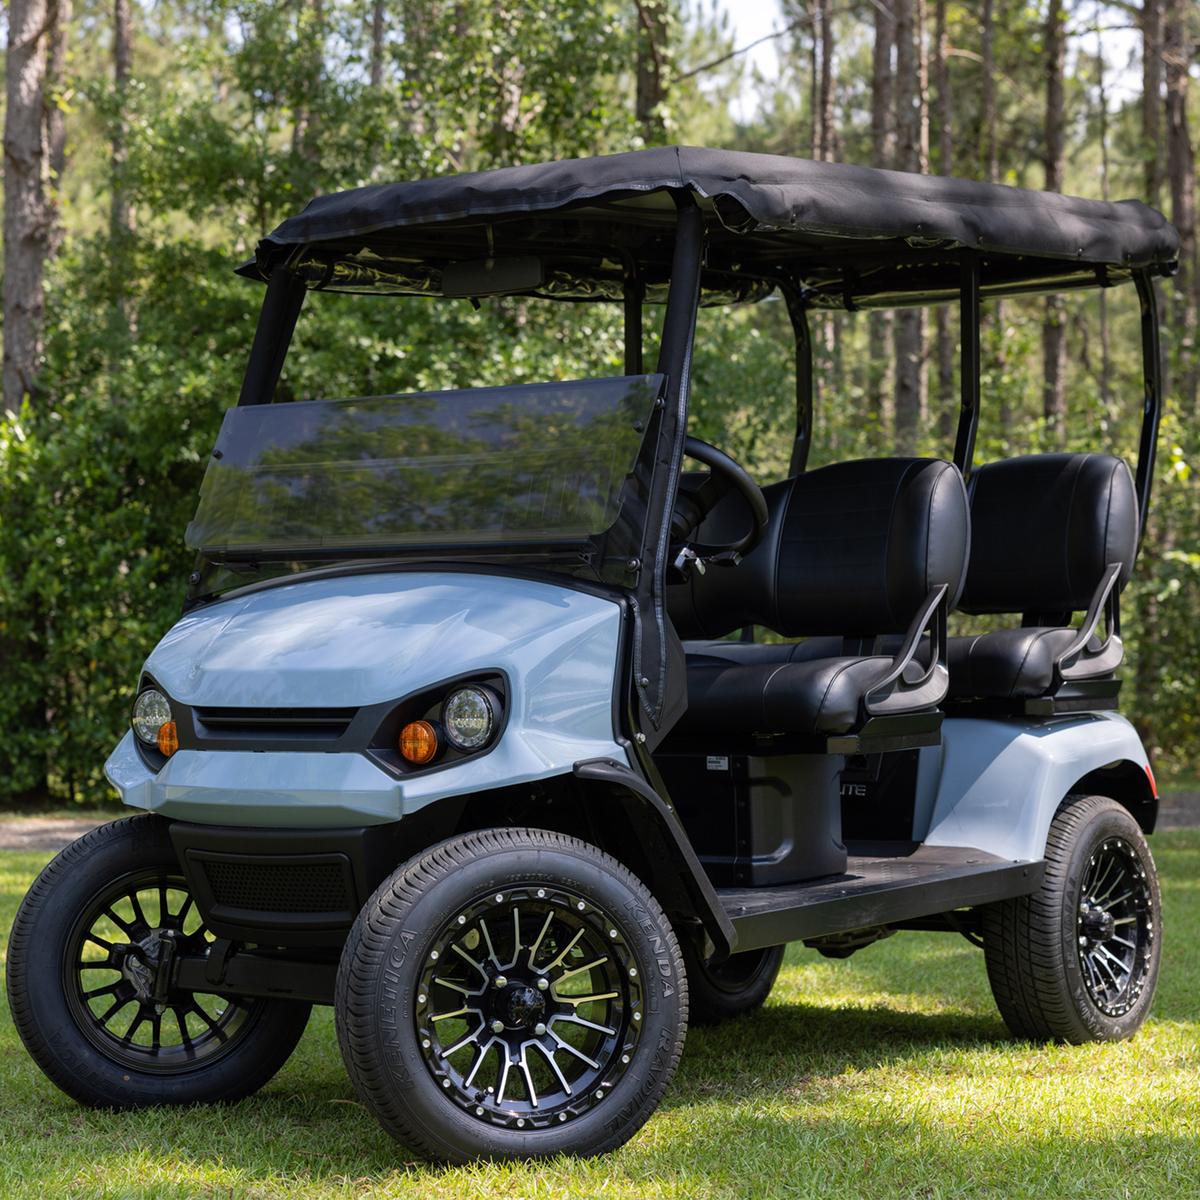 RedDot EZGO Liberty 4-Passenger Beige 3-Sided Over-The-Top Enclosure